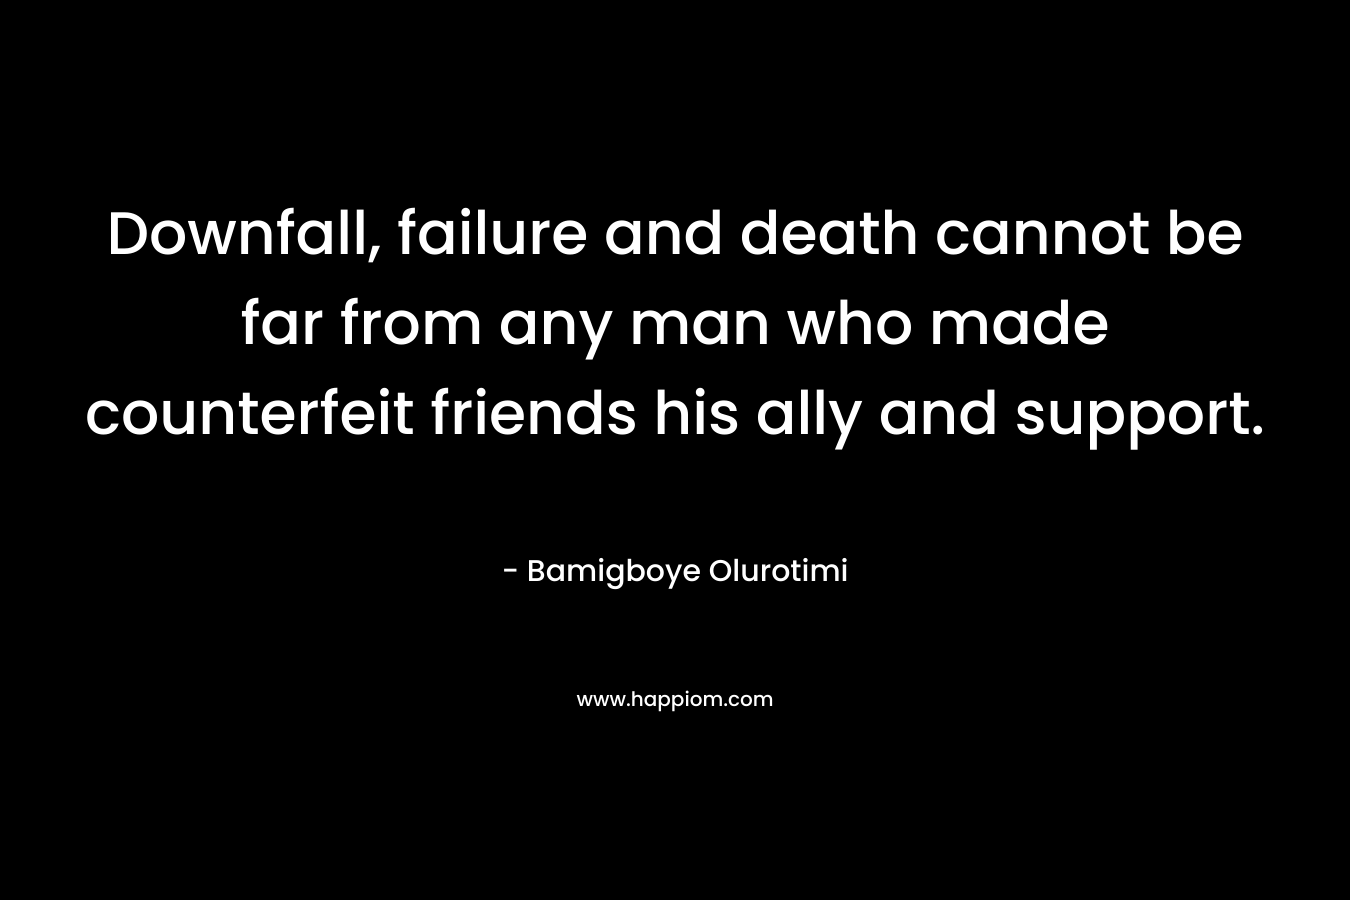 Downfall, failure and death cannot be far from any man who made counterfeit friends his ally and support.